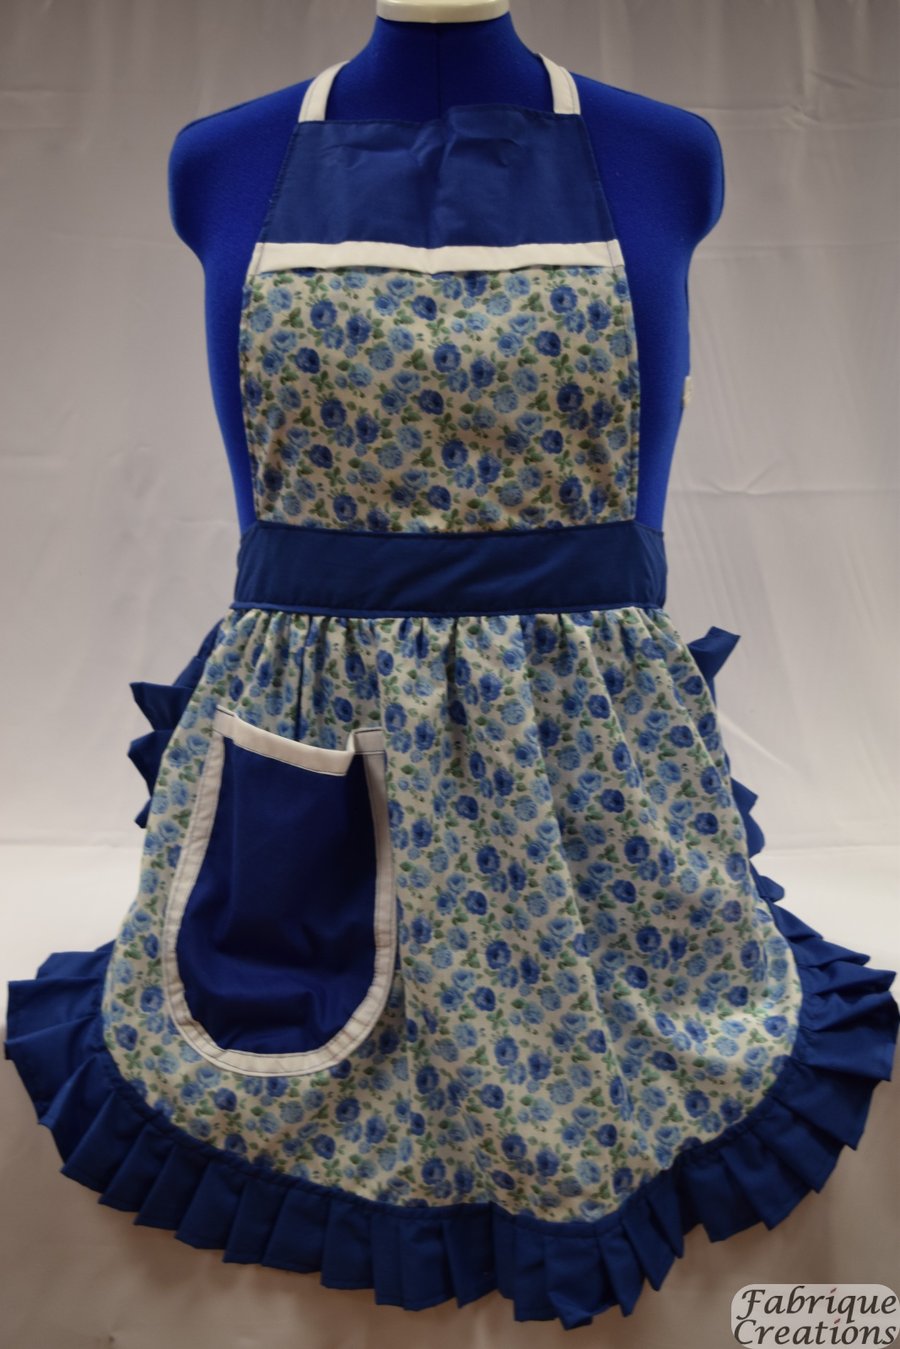 Vintage 50s Style Full Apron Pinny - Blue & White Roses with Blue Trim